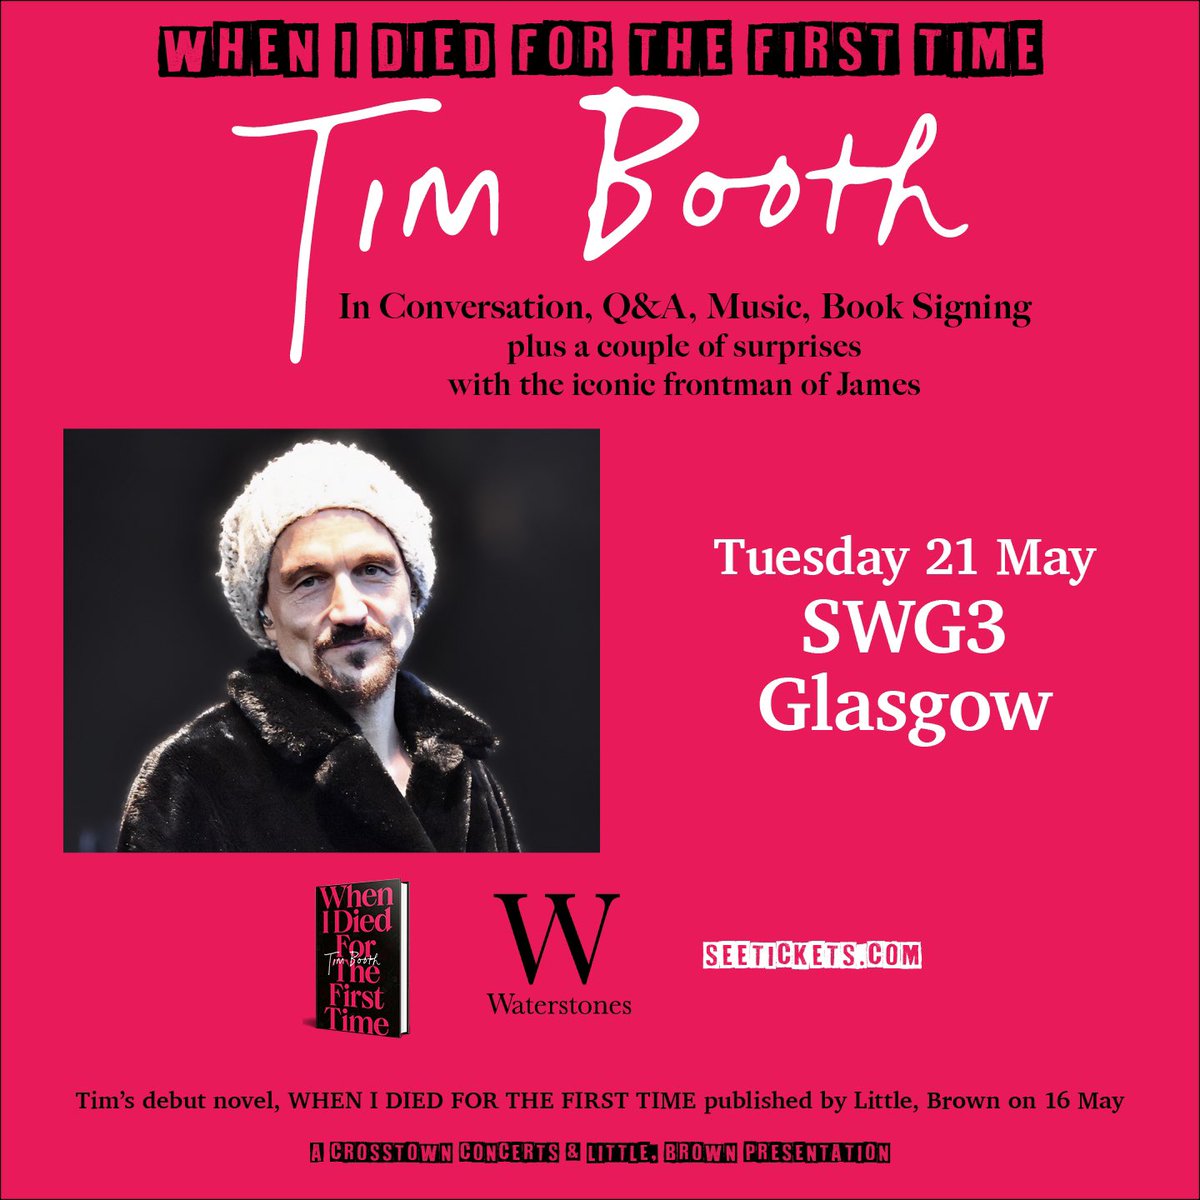 Join Tim Booth in an evening in Glasgow to celebrate the launch of his debut novel, When I Died For The First Time. Tickets go on sale tomorrow at 12pm.